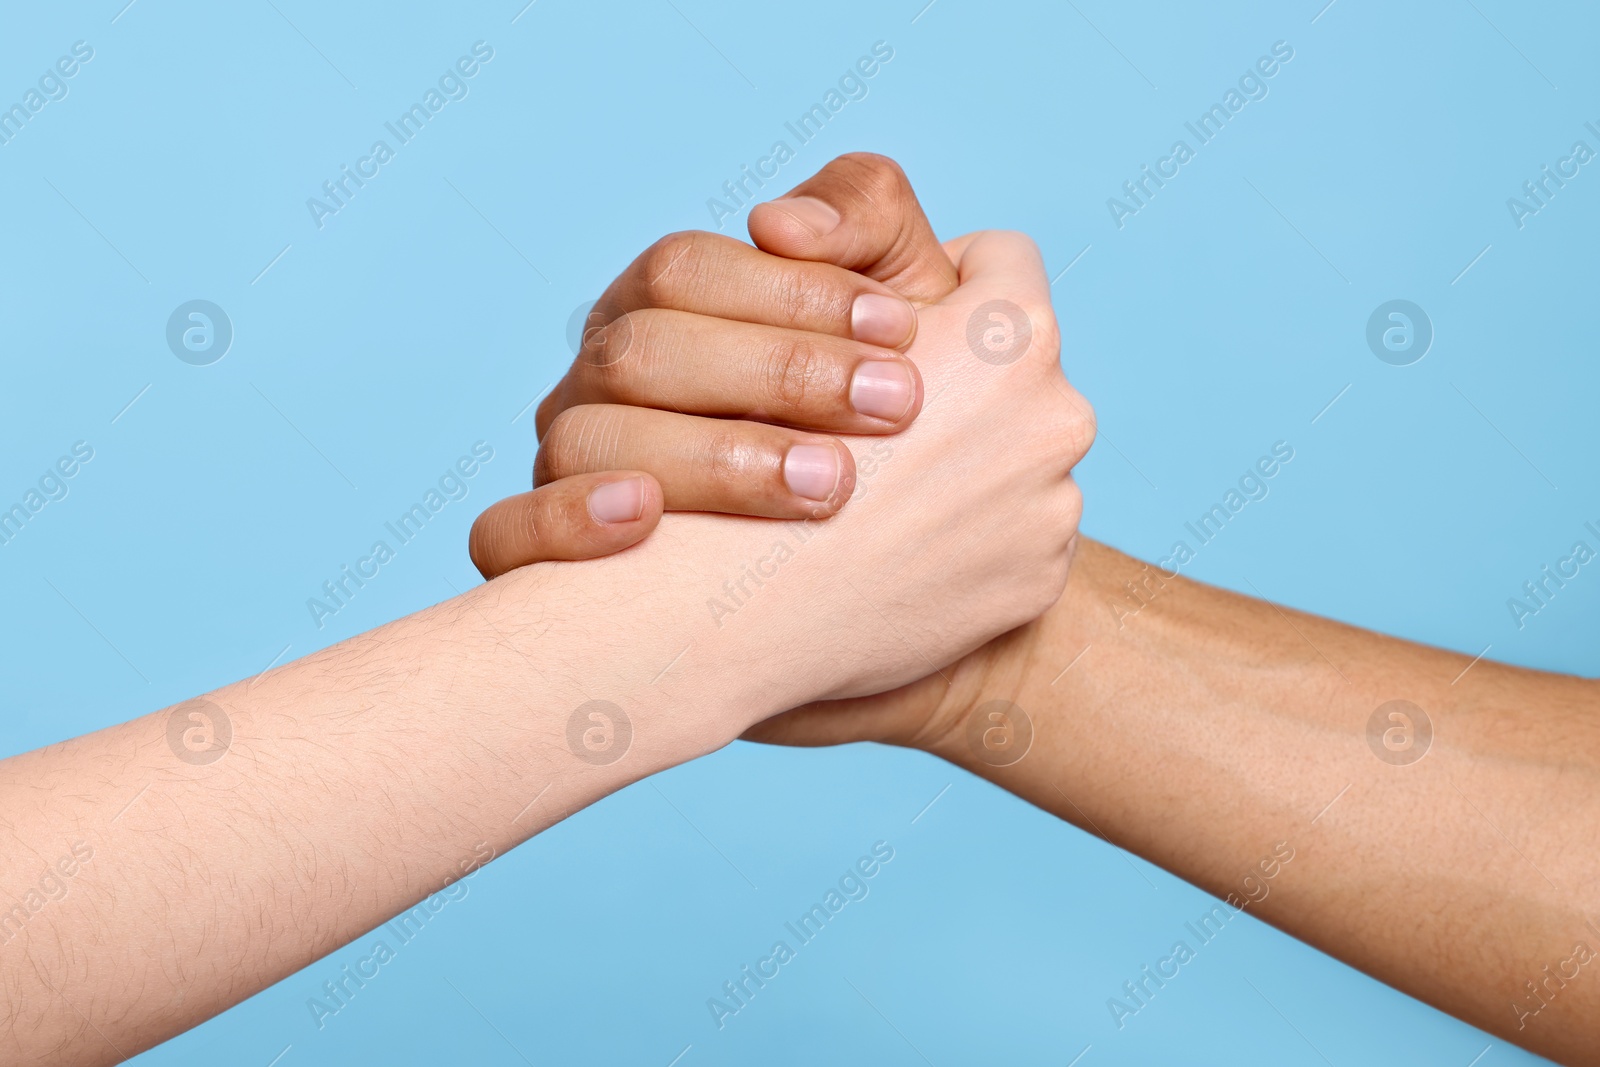 Photo of International relationships. People clasping hands on light blue background, closeup